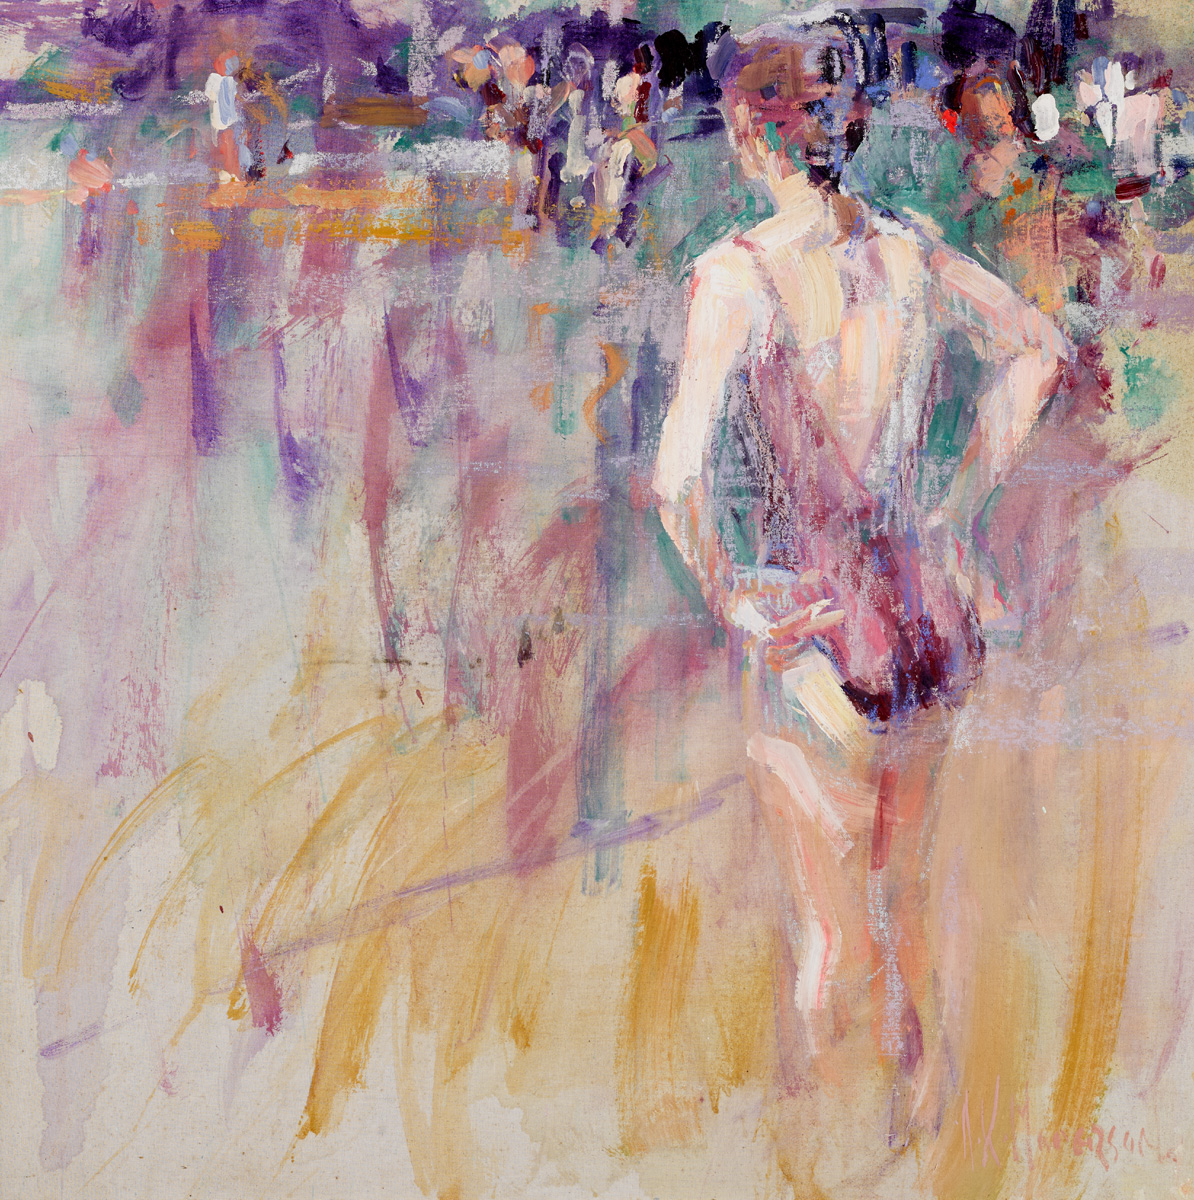 FIGURE STUDY [LISMORE RIVER POOL] by Arthur K. Maderson (b.1942) (b.1942) at Whyte's Auctions